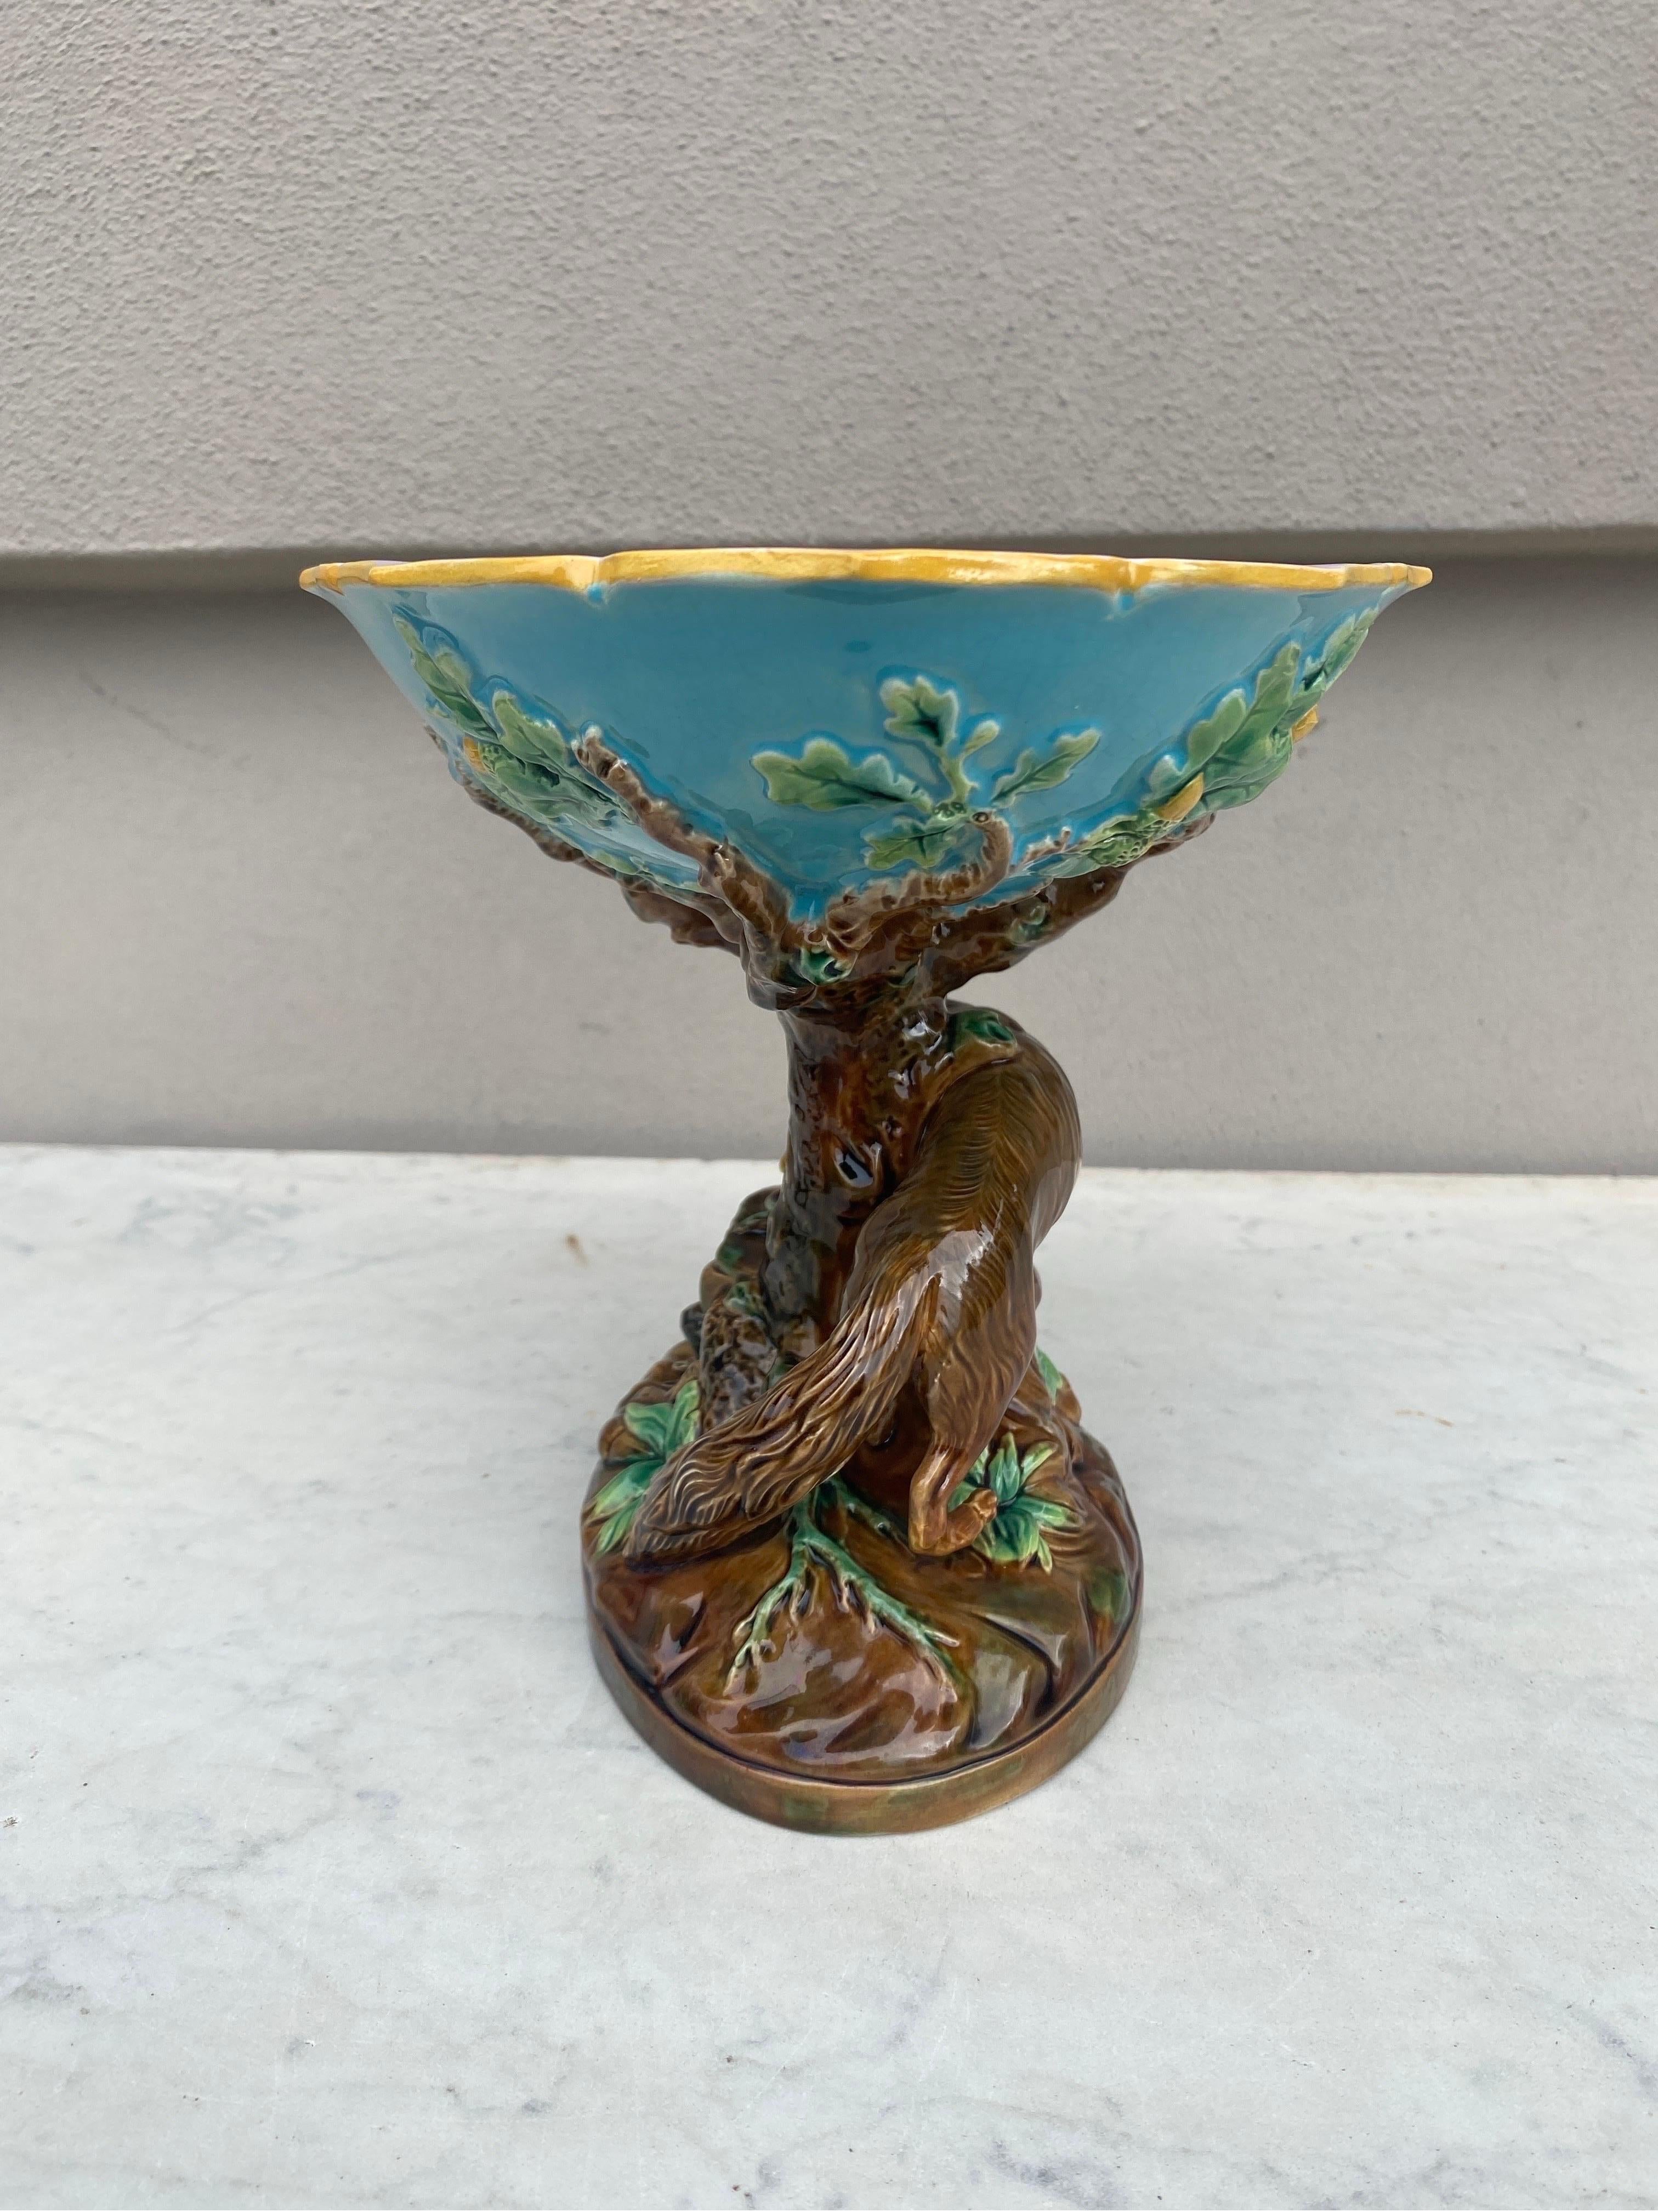 19th-Century fox & rabbit compote or cacke stand signed George Jones.
With a tree trunk supporting an aqua bowl outside and pink inside decorated with oak leaves.
Ilustrated in the book of Dawes page 116.
  